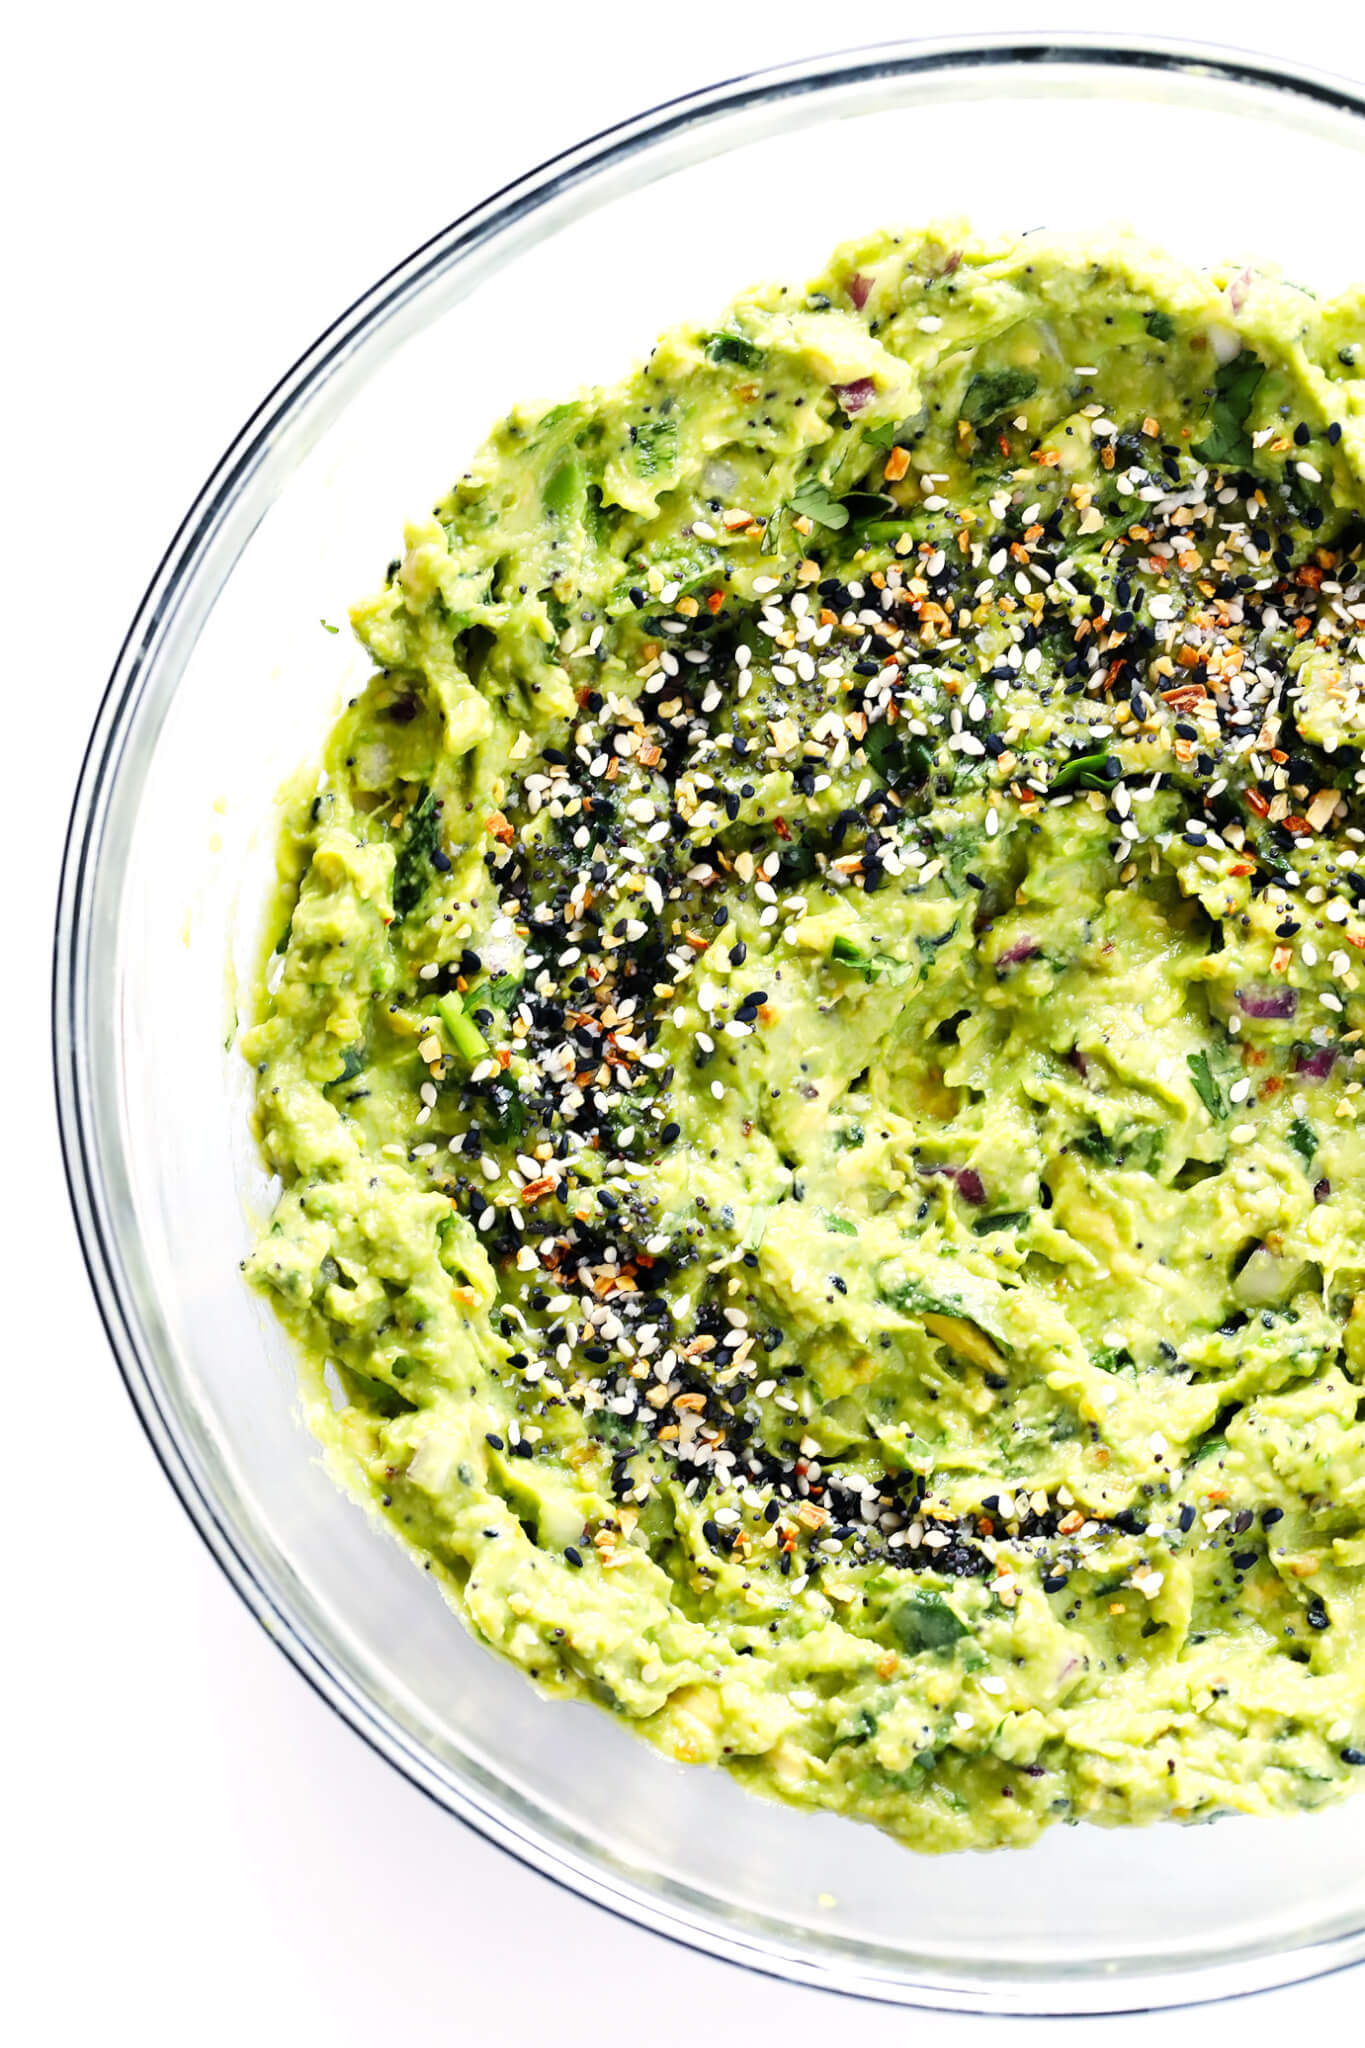 This "Everything" Guacamole recipe is kicked up a delicious notch with some everything bagel seasoning. It's the perfect savory appetizer dip for a party! | gimmesomeoven.com (Vegetarian | Gluten-Free | Vegan)